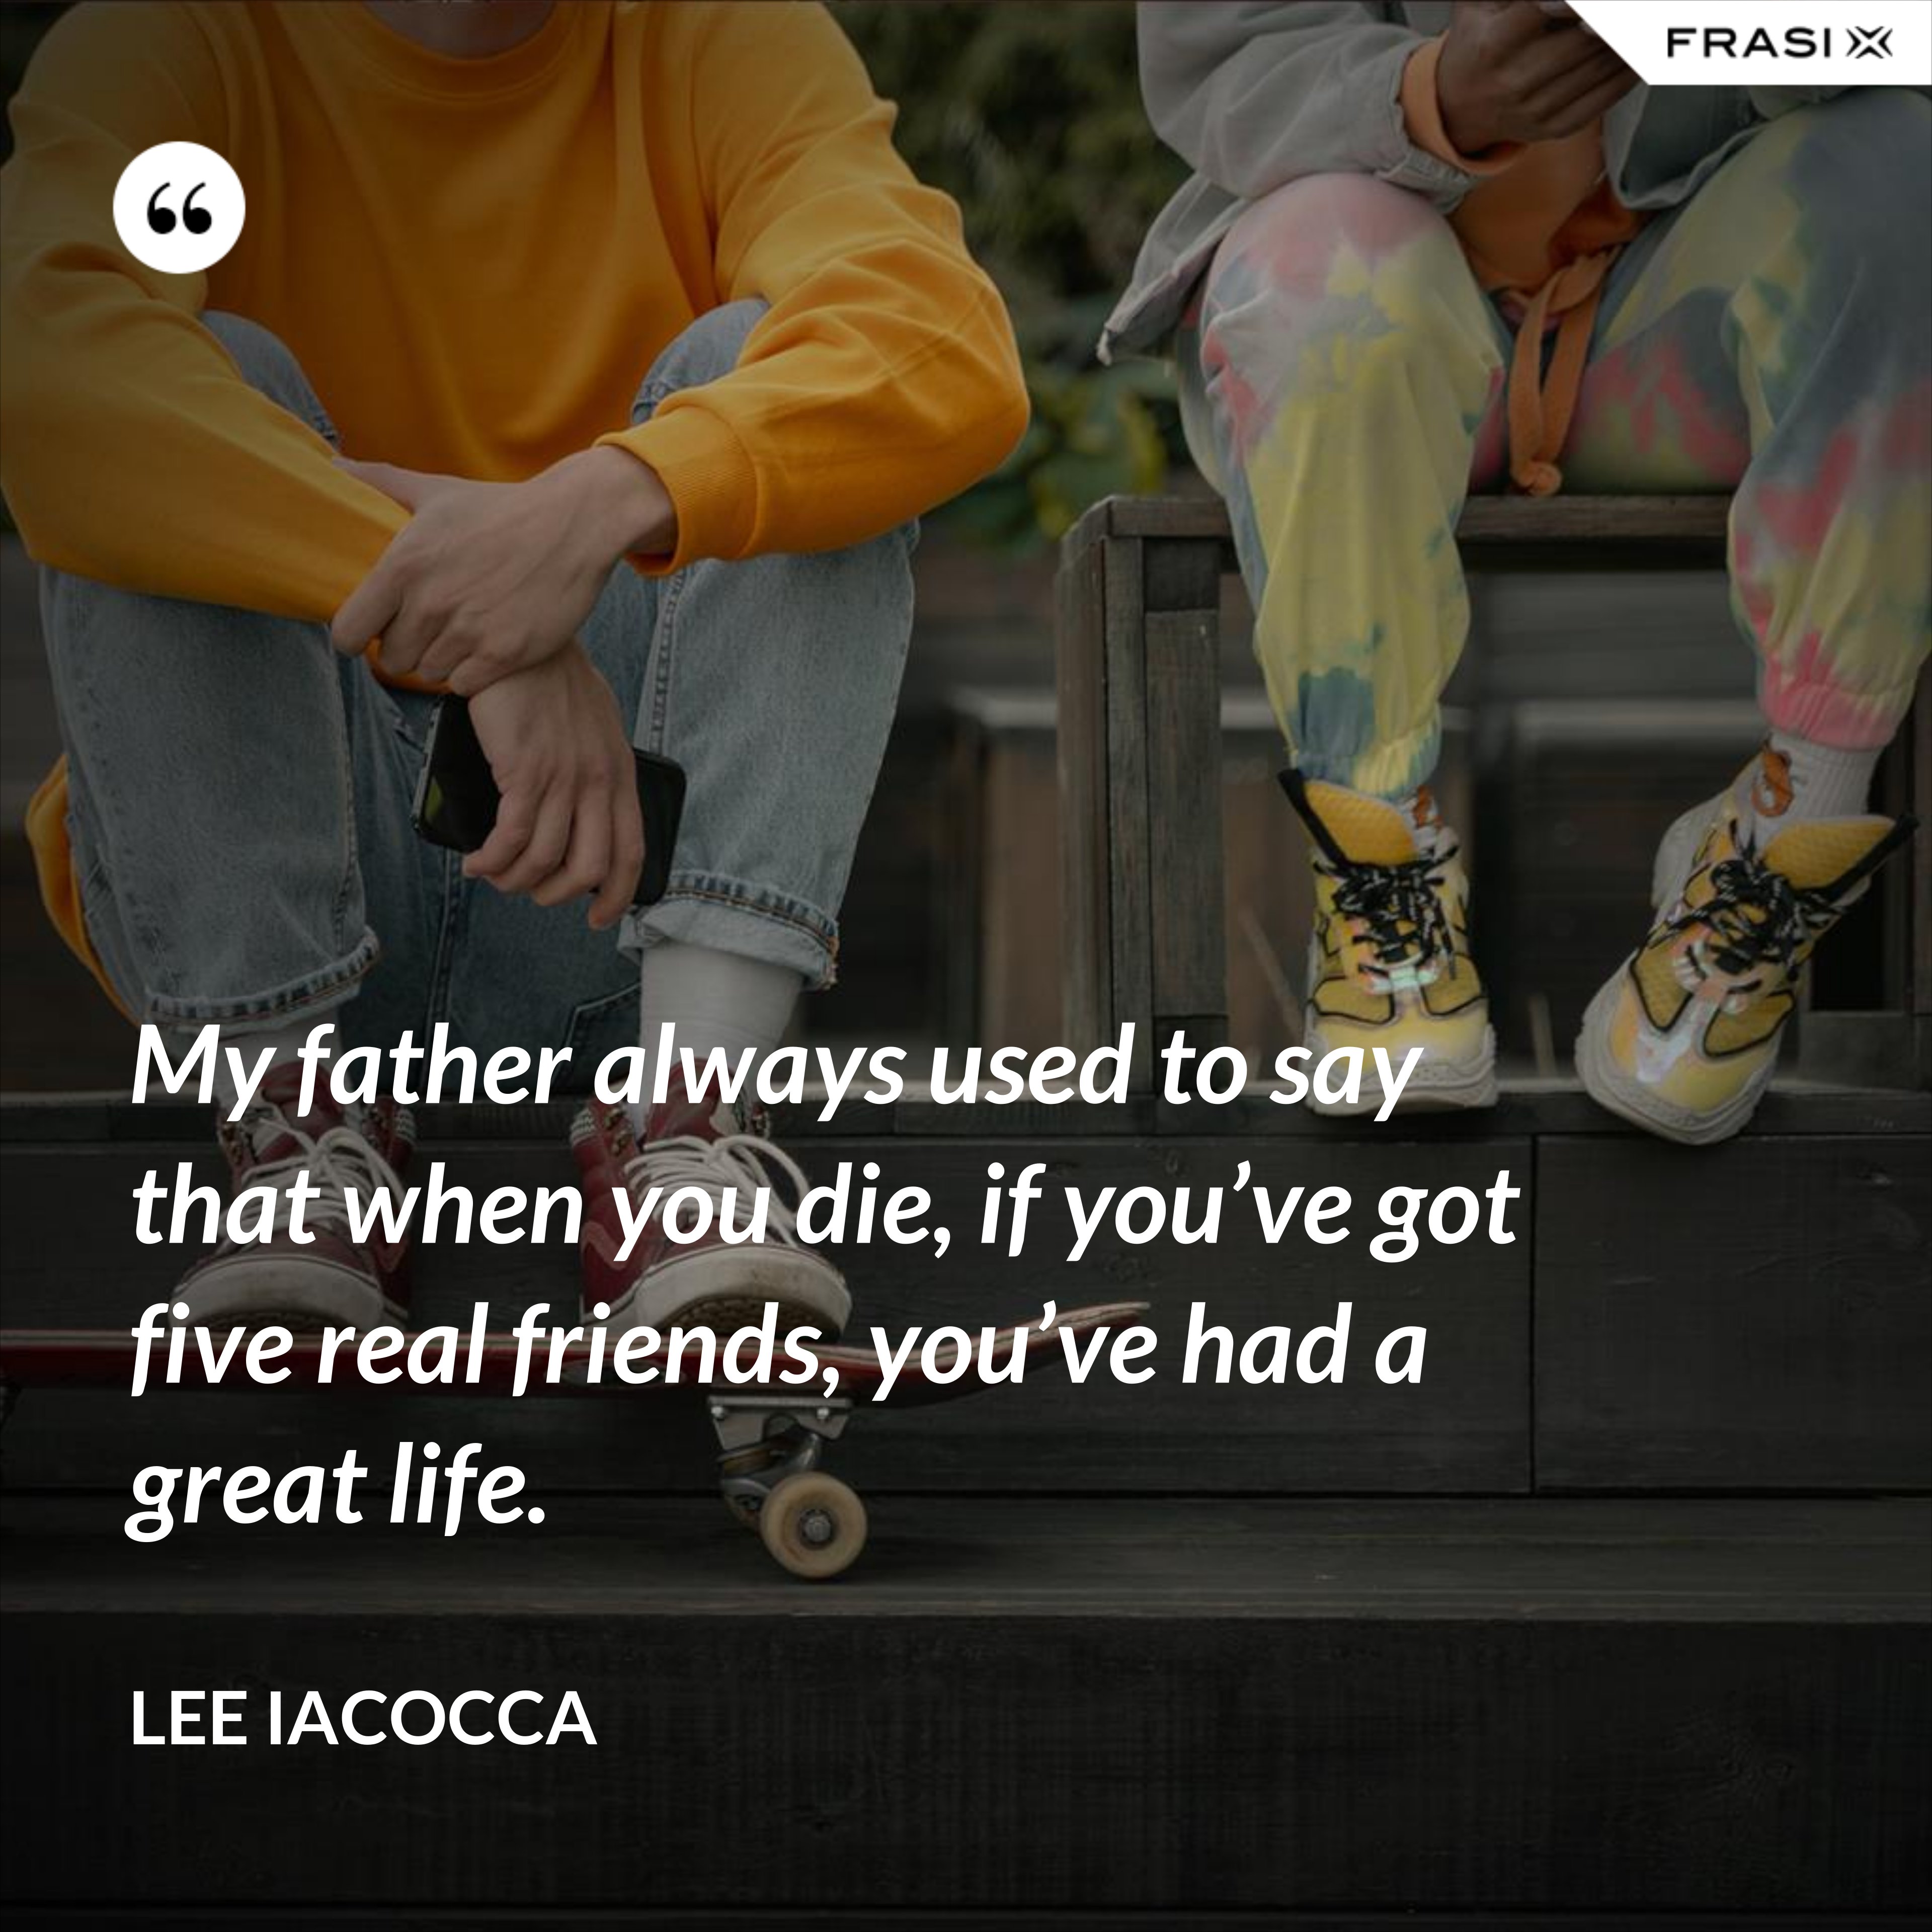 My father always used to say that when you die, if you’ve got five real friends, you’ve had a great life. - Lee Iacocca